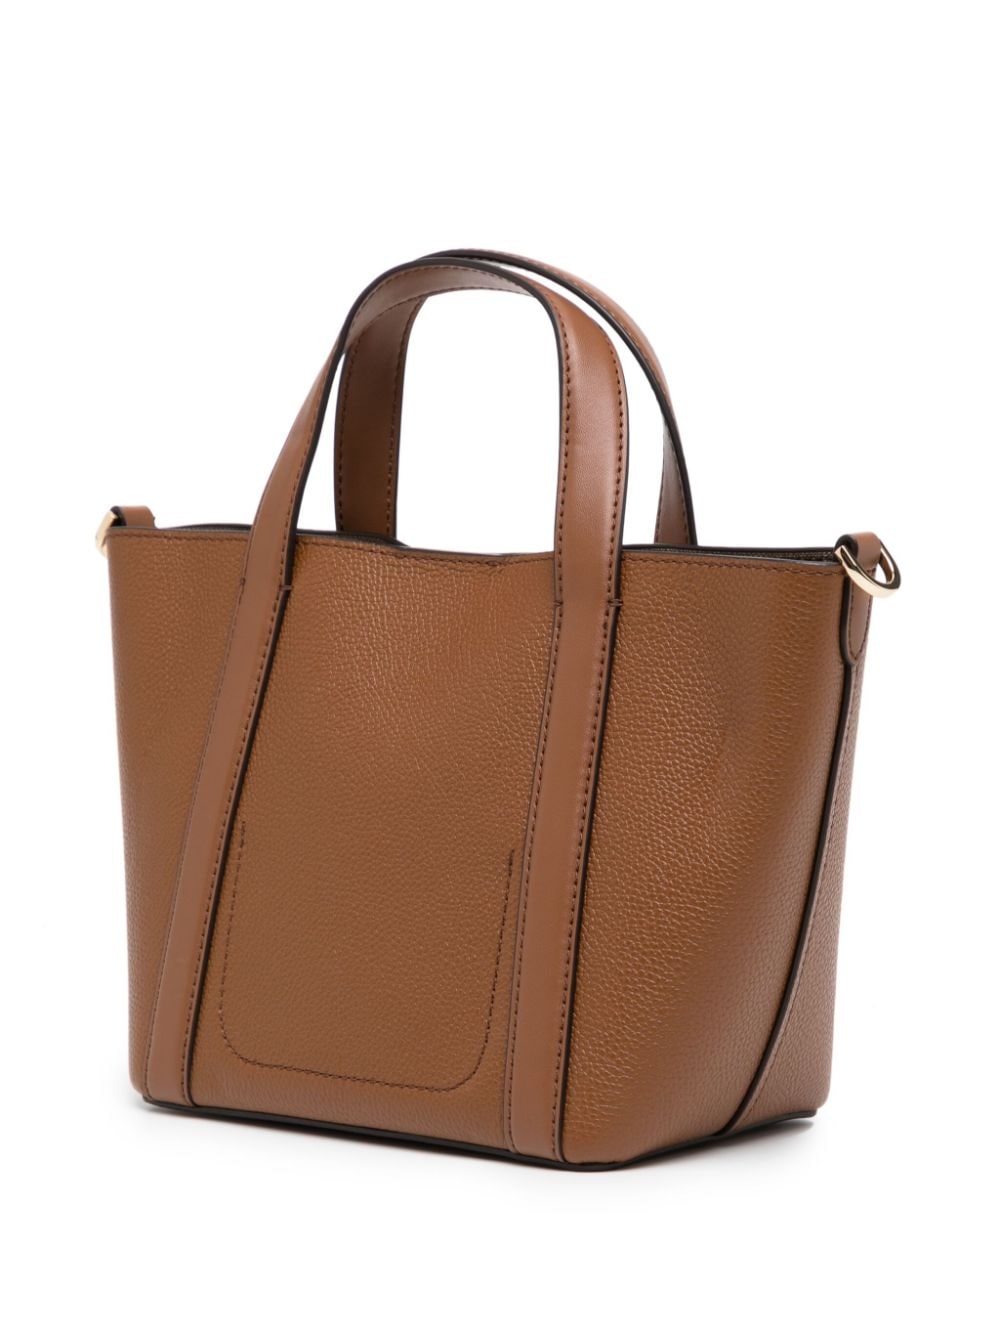 MICHAEL Michael Kors Hadleigh Large Pebbled Leather Tote Bag in